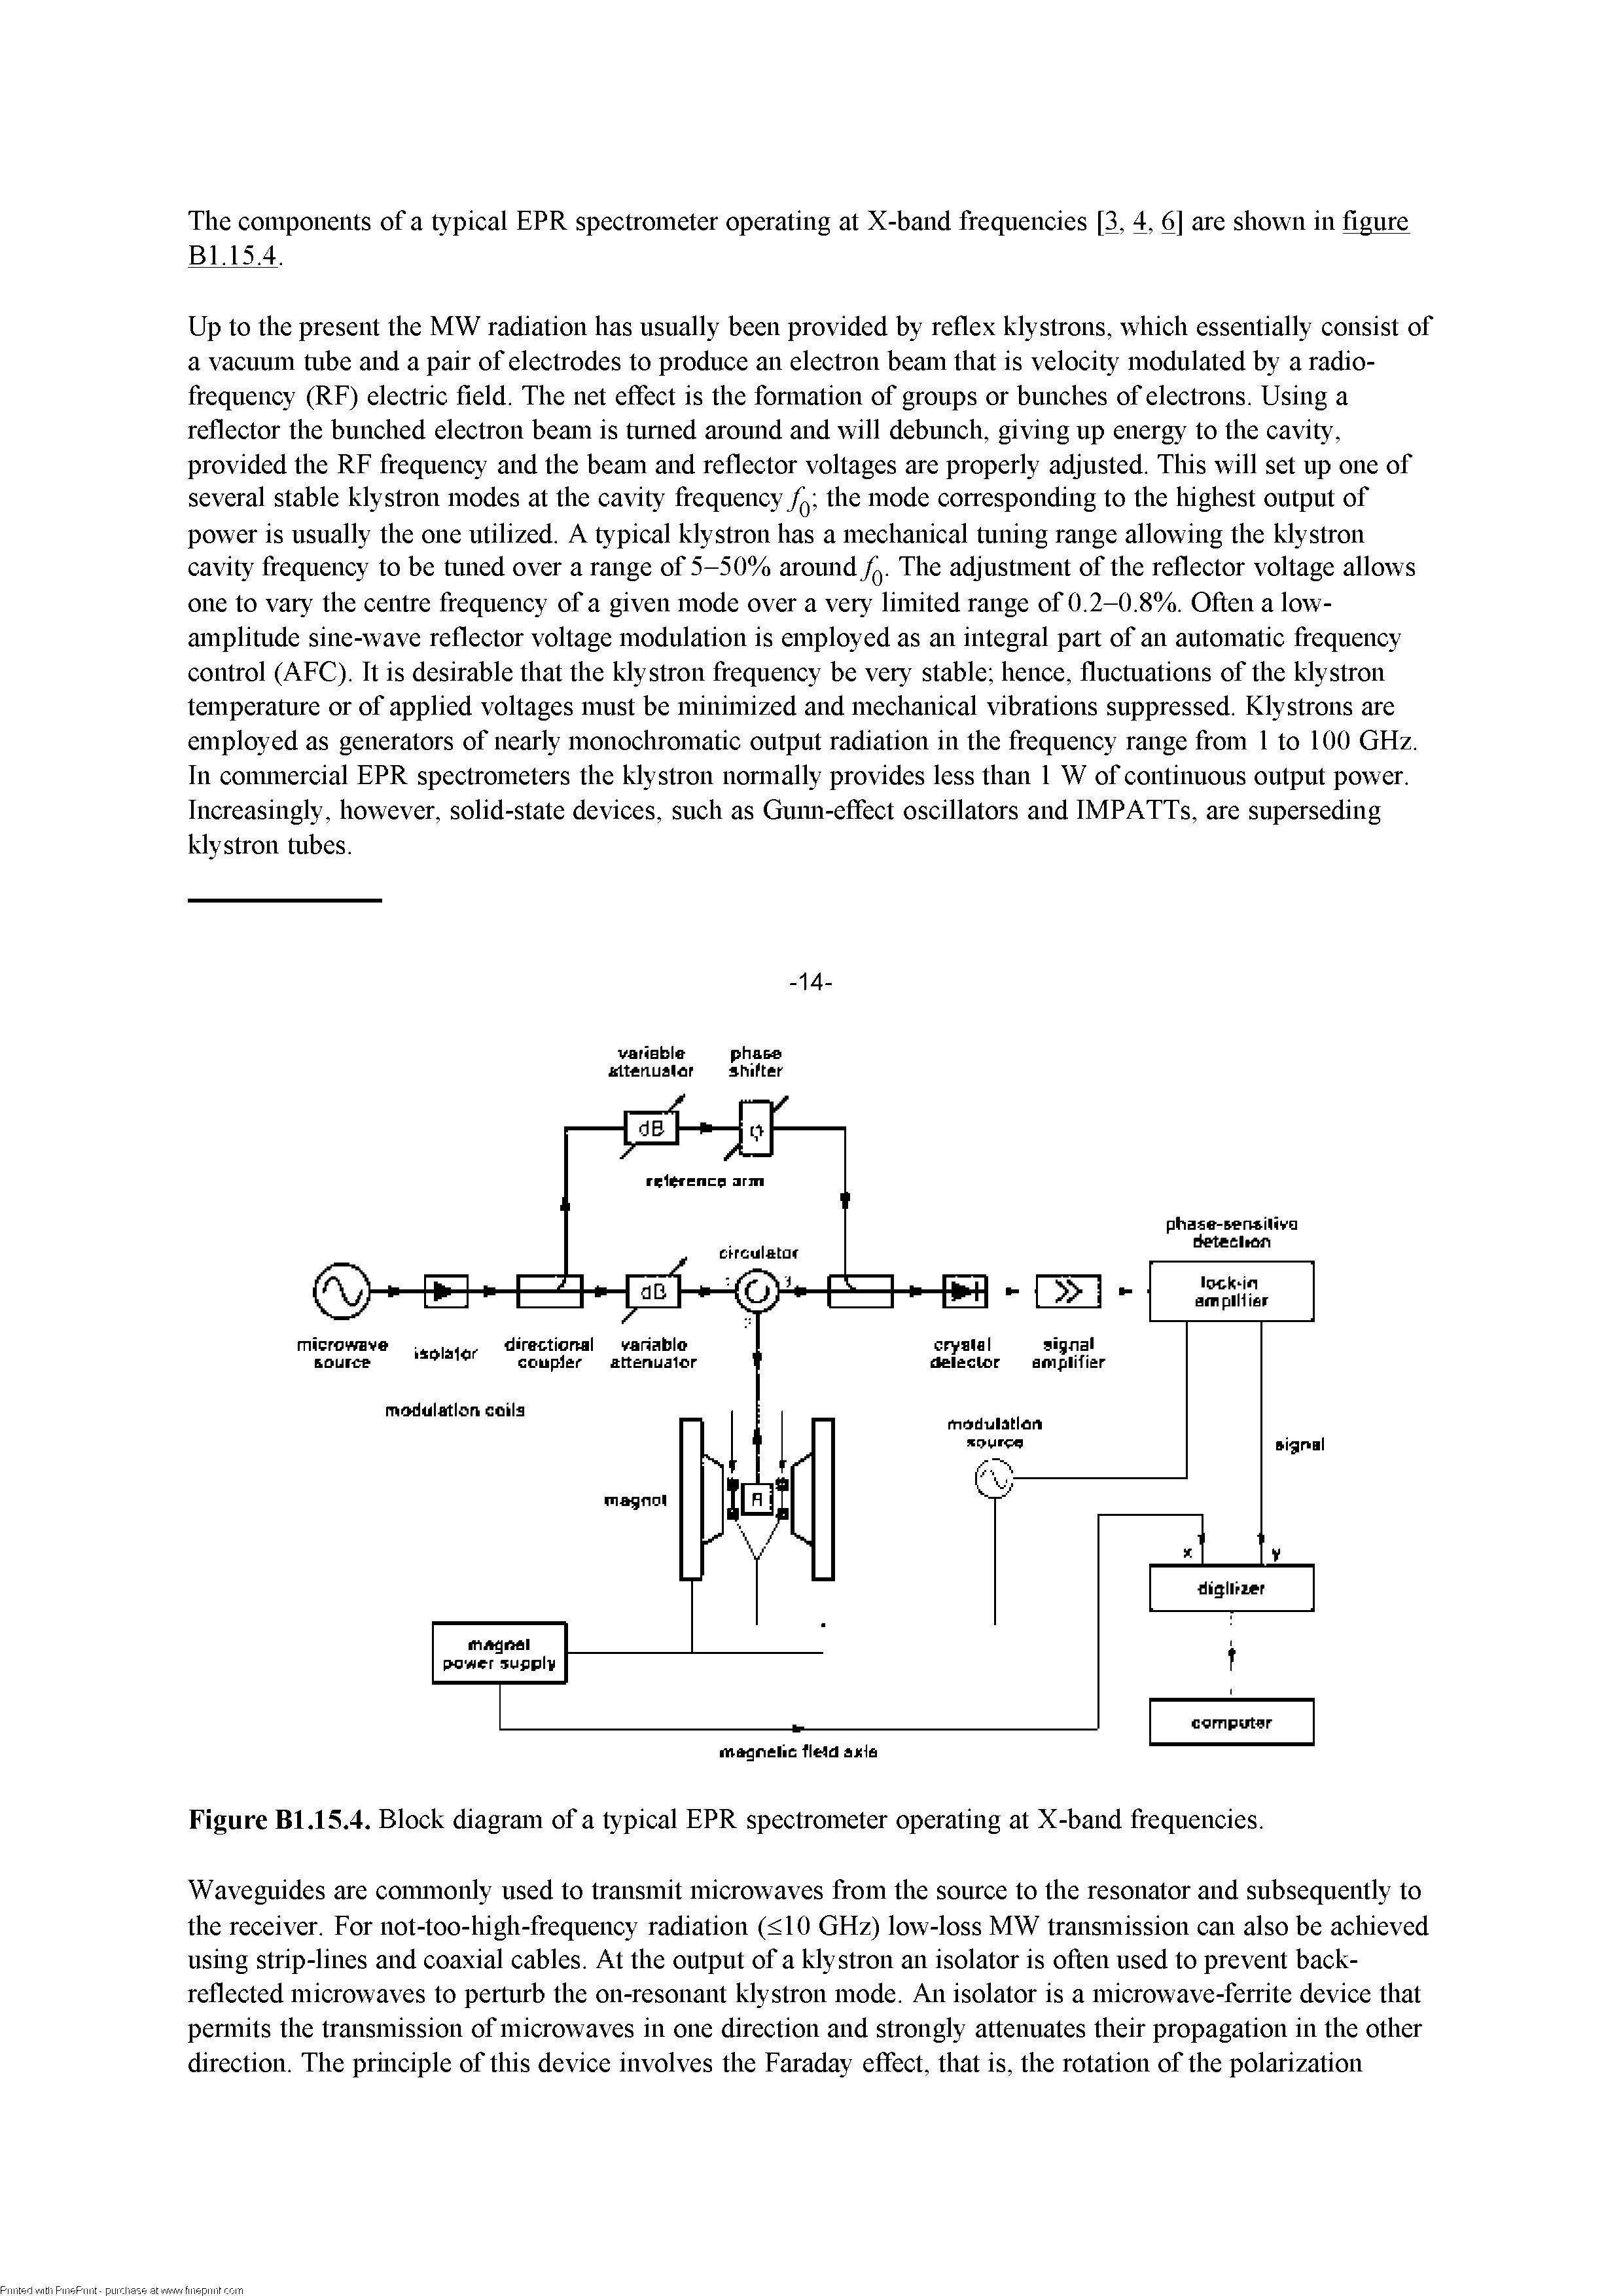 Figure Bl.15.4. Block diagram of a typical EPR spectrometer operating at X-band frequencies.